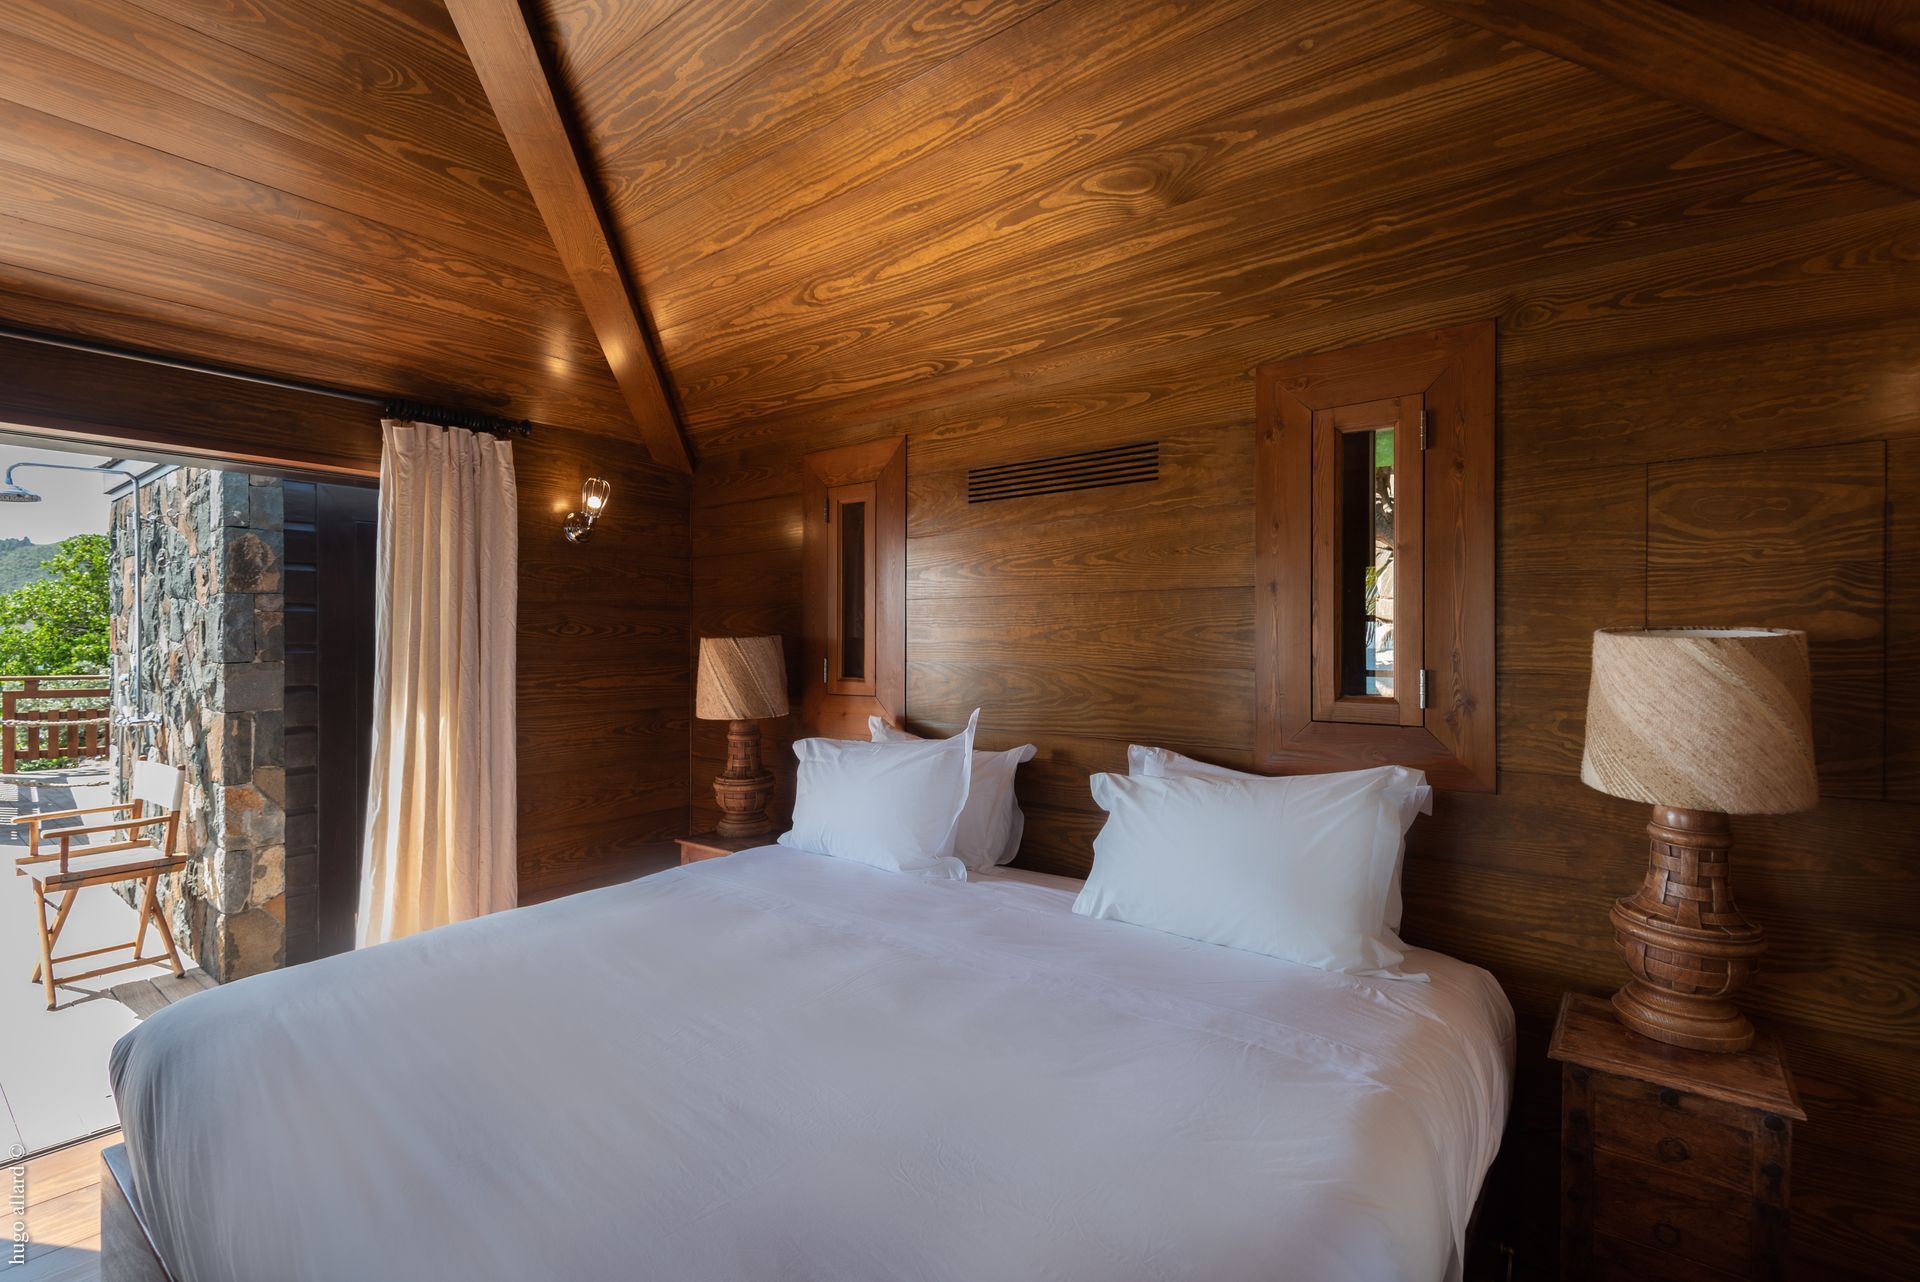 a bedroom with a bed, lamps, and a wooden ceiling